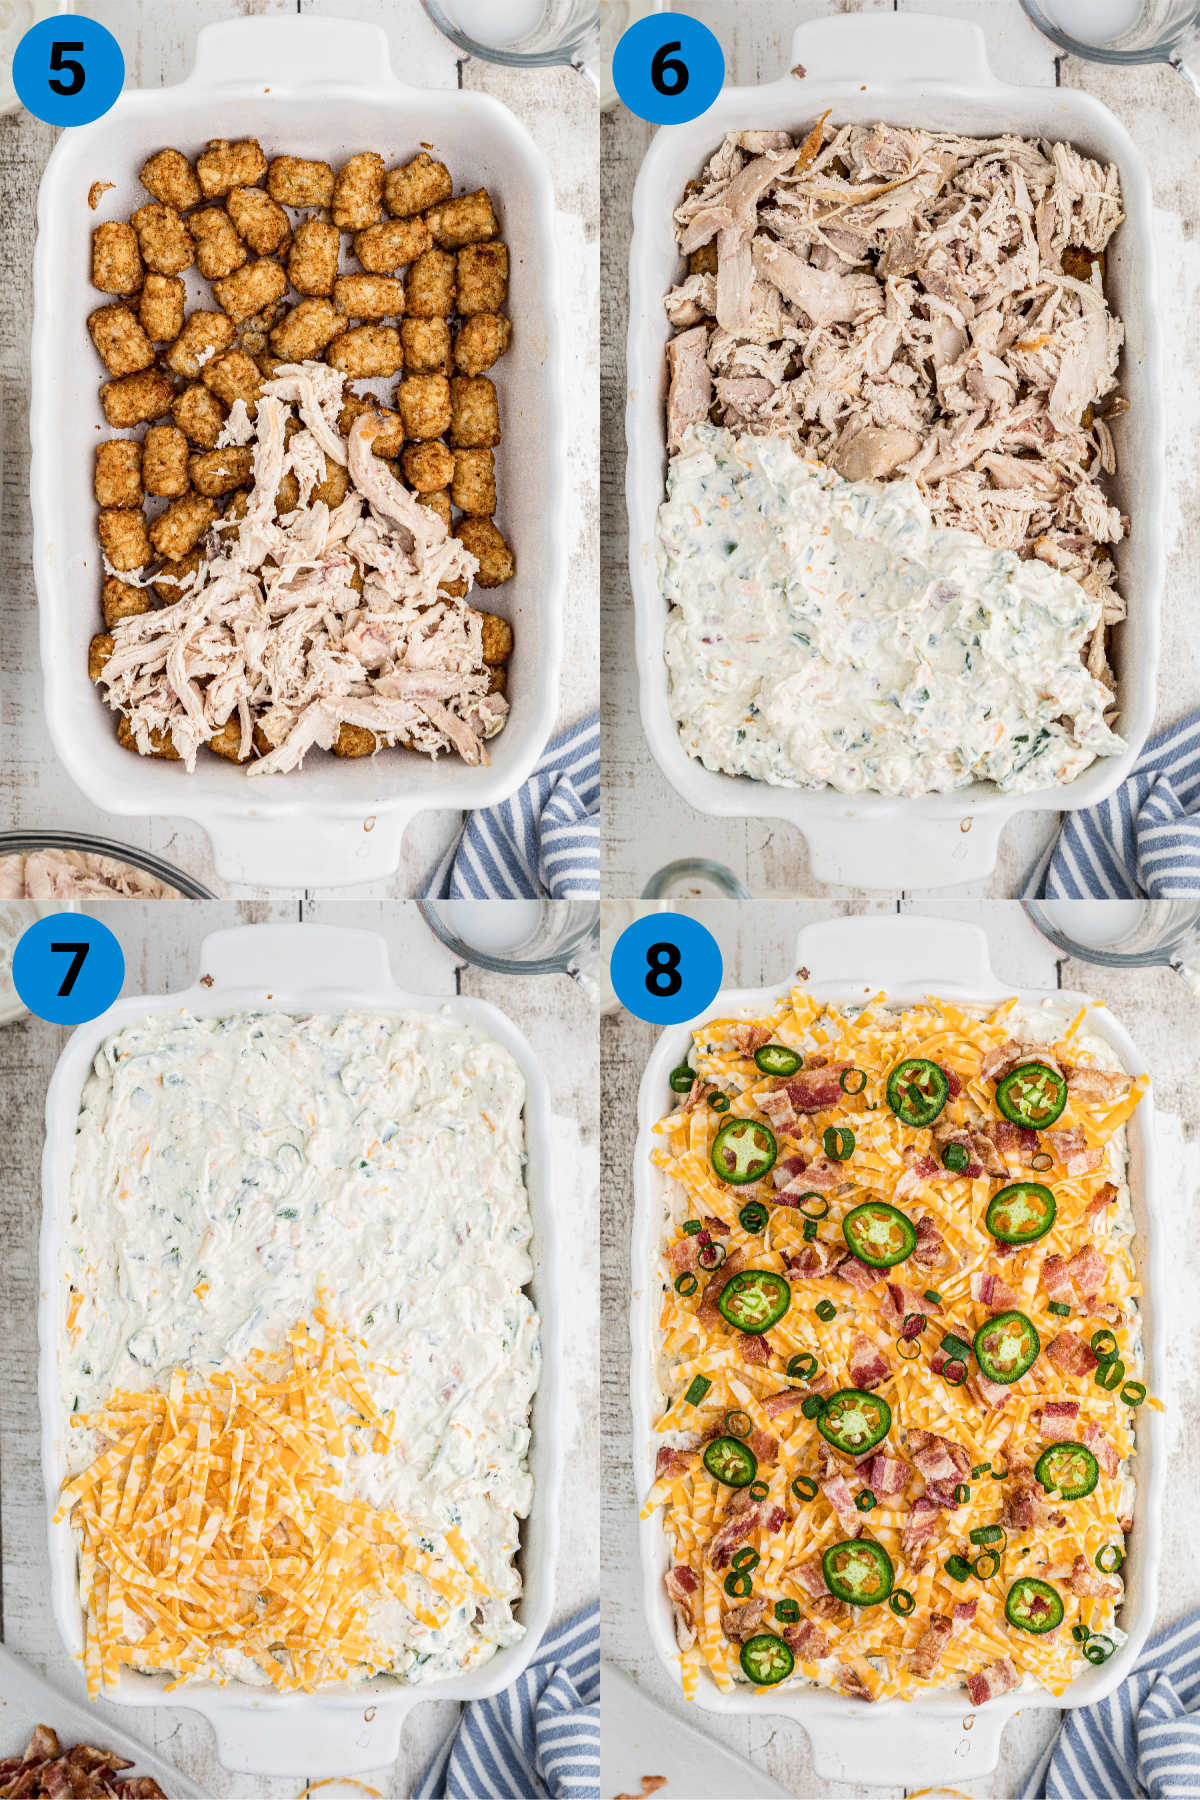 Jalapeno Popper Tater Tot Casserole collage, showing how to make the dish.